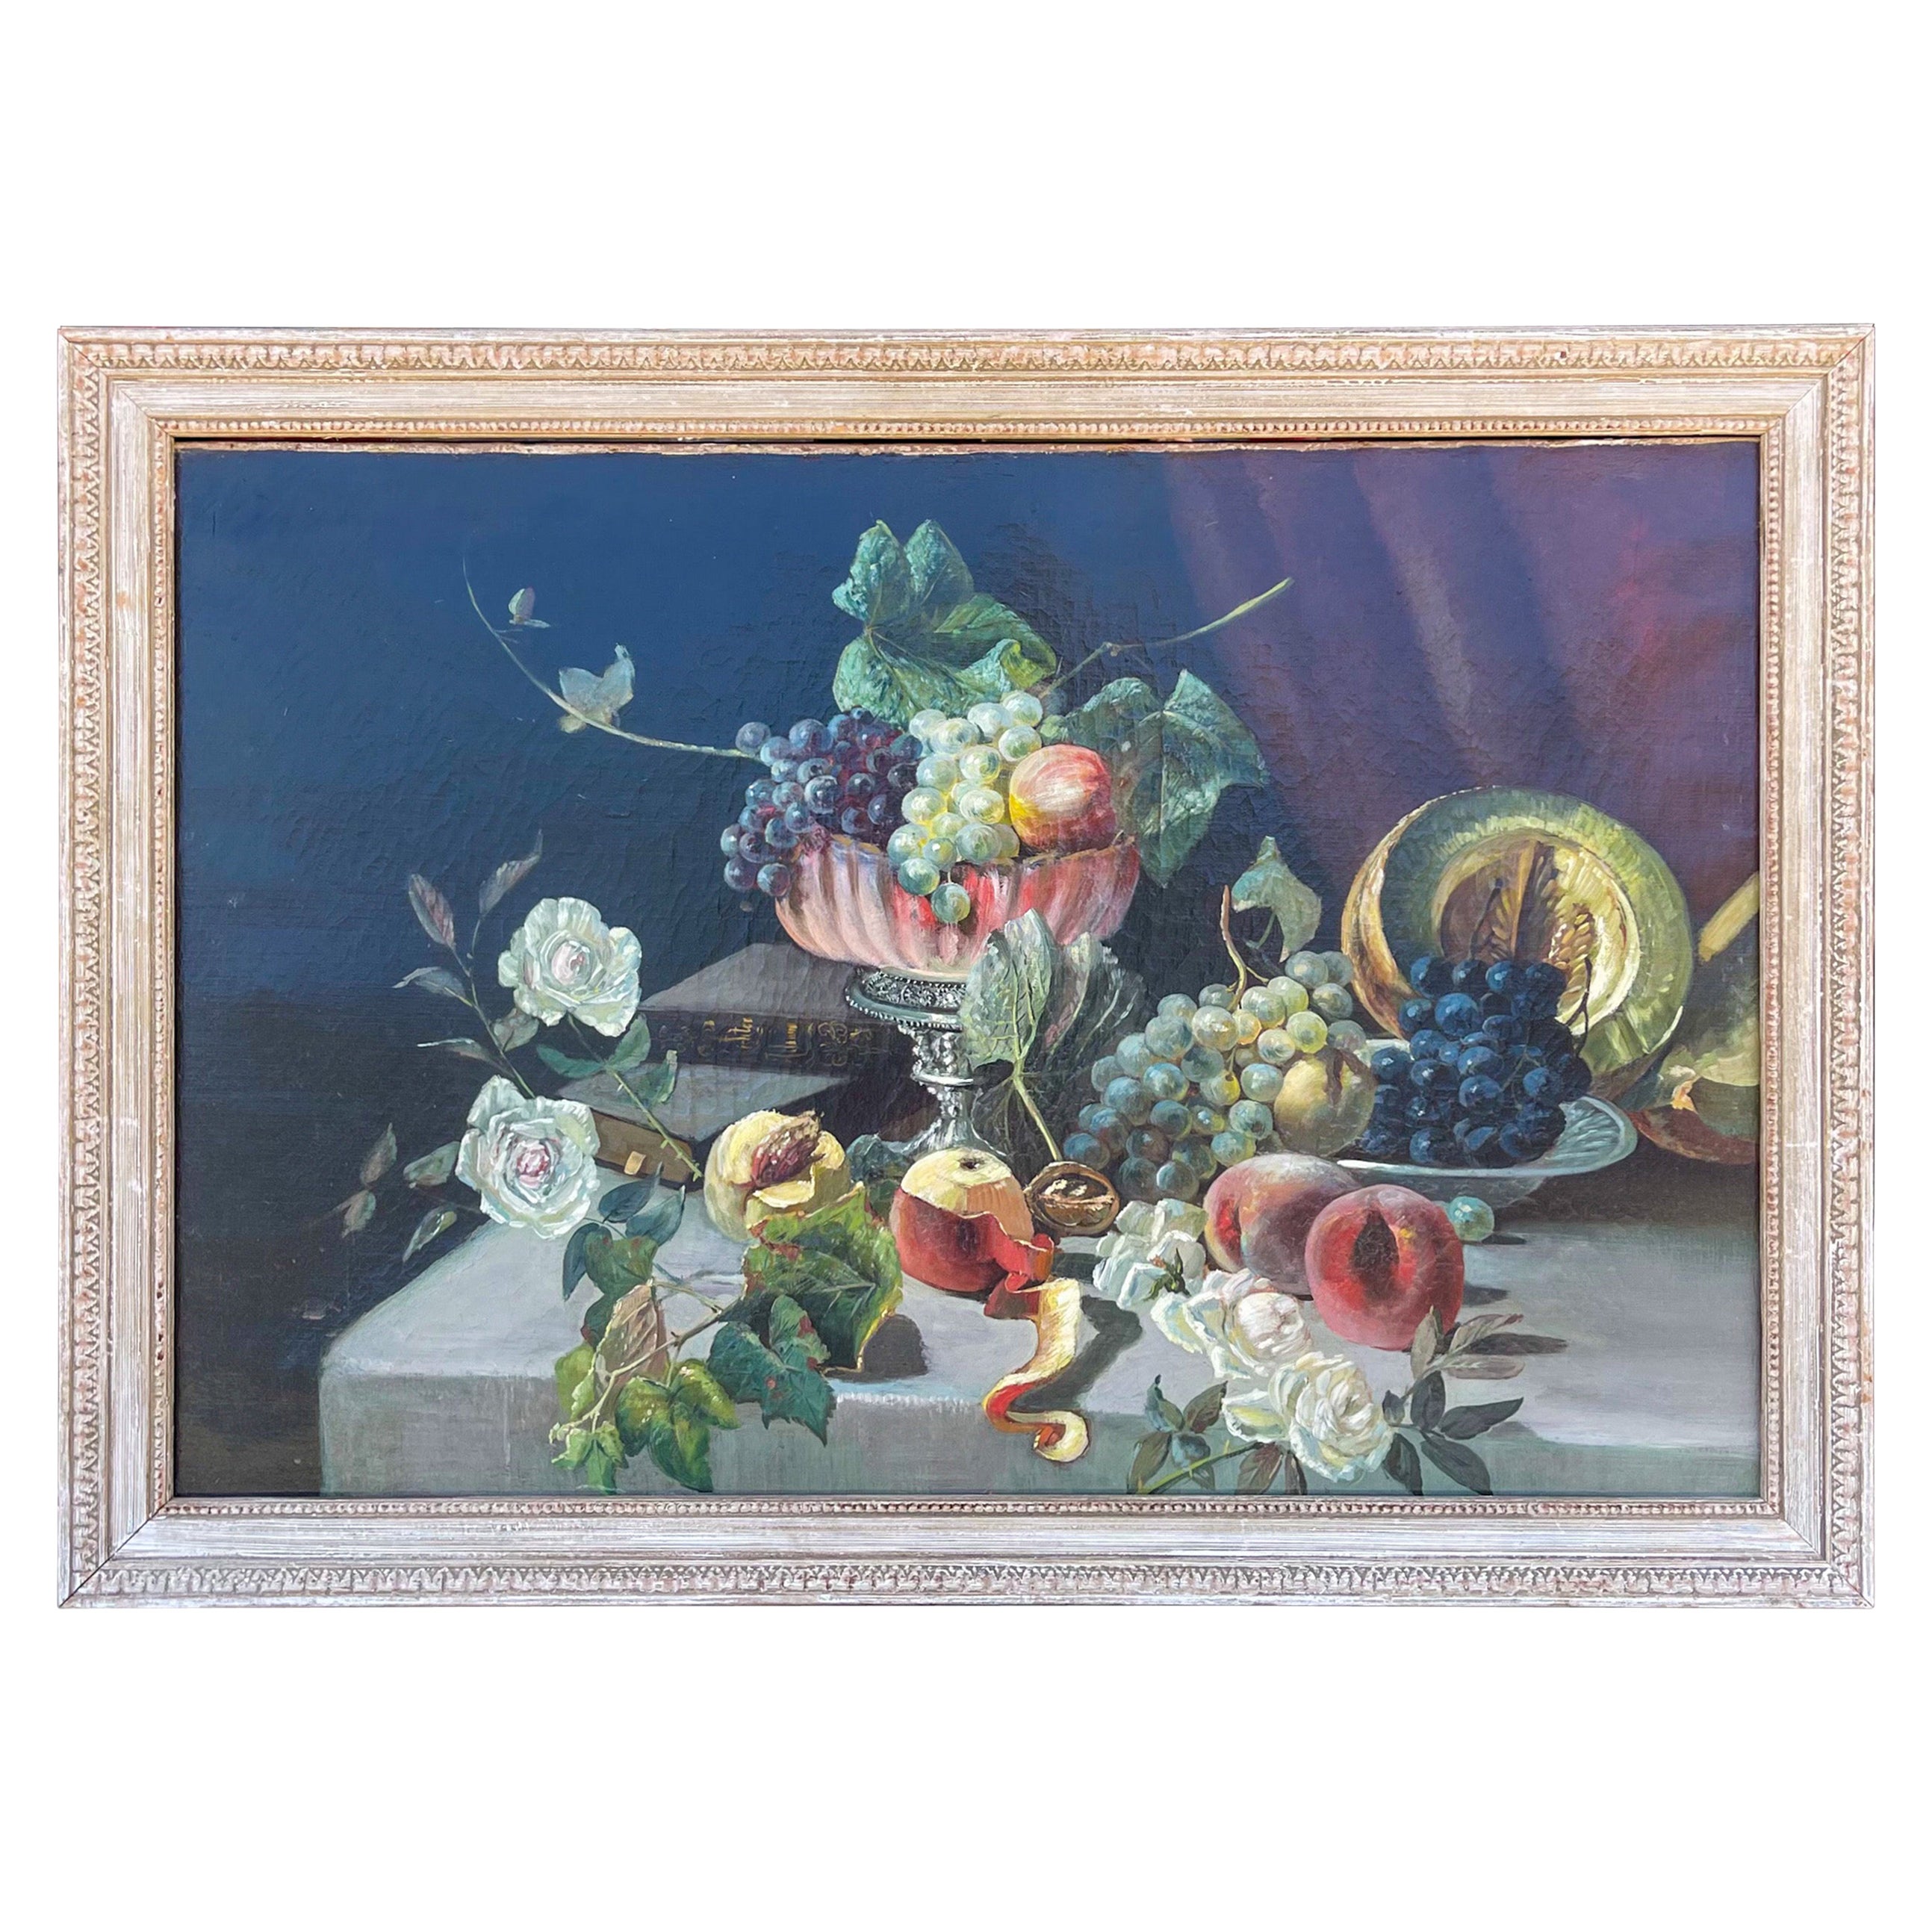 19th-C, Still Life Oil on Canvas Painting Depicting Fruit and Books, Unsigned